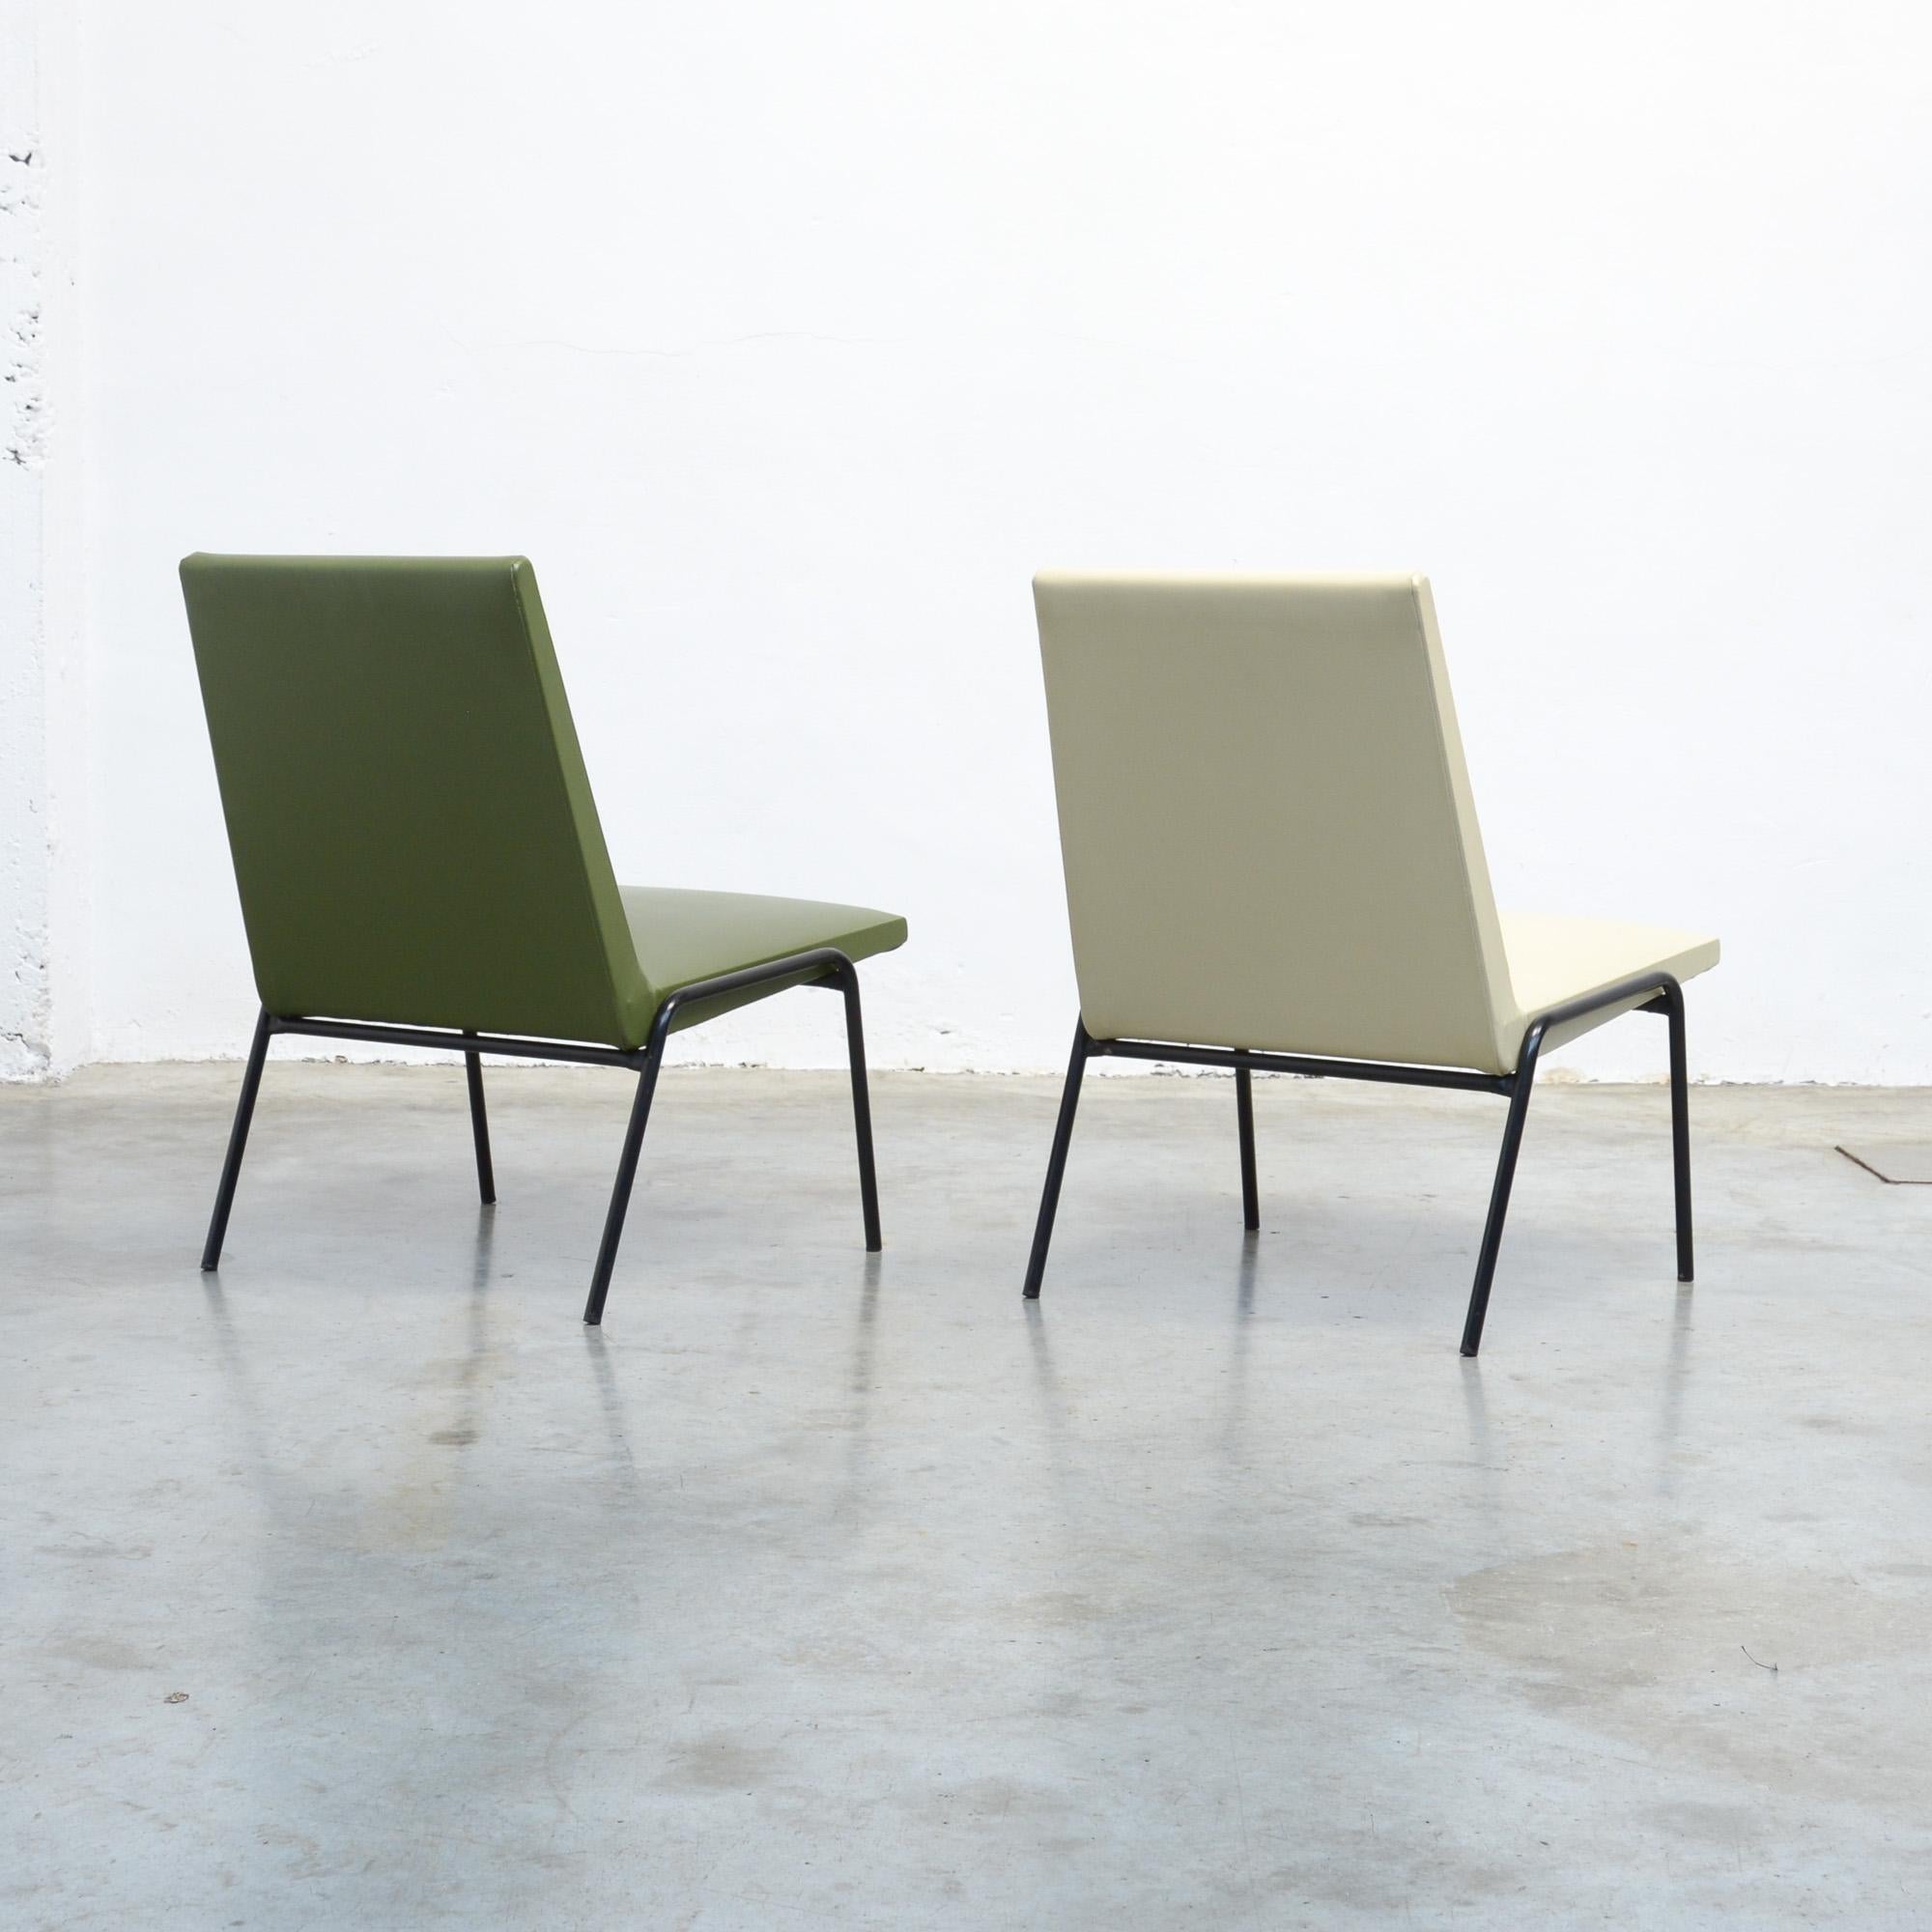 20th Century Low Chairs, Robert by Pierre Guariche for Meurop